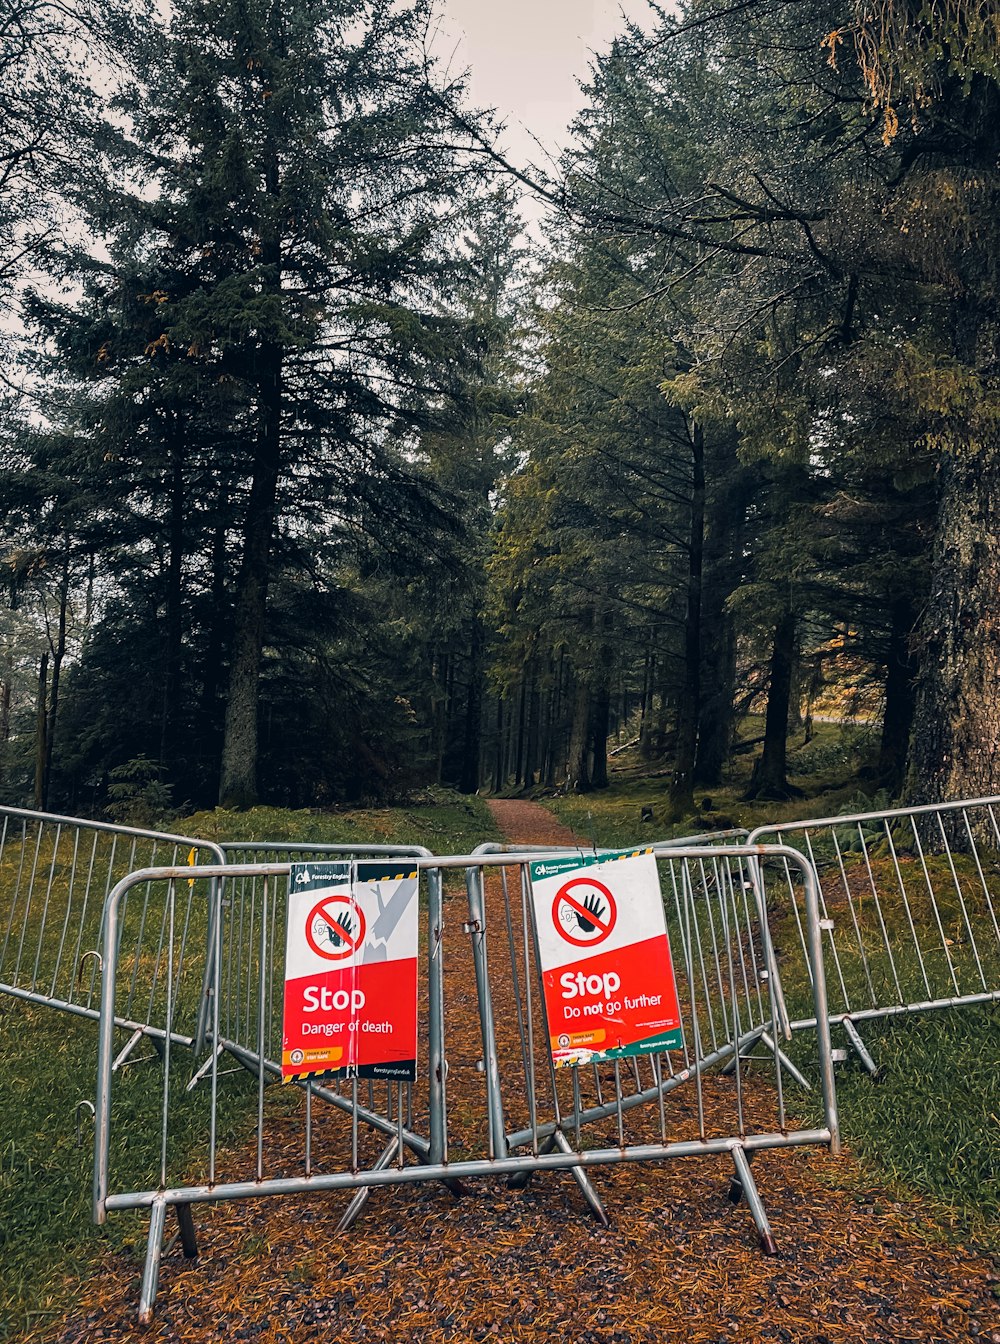 a metal barricade with two signs on it